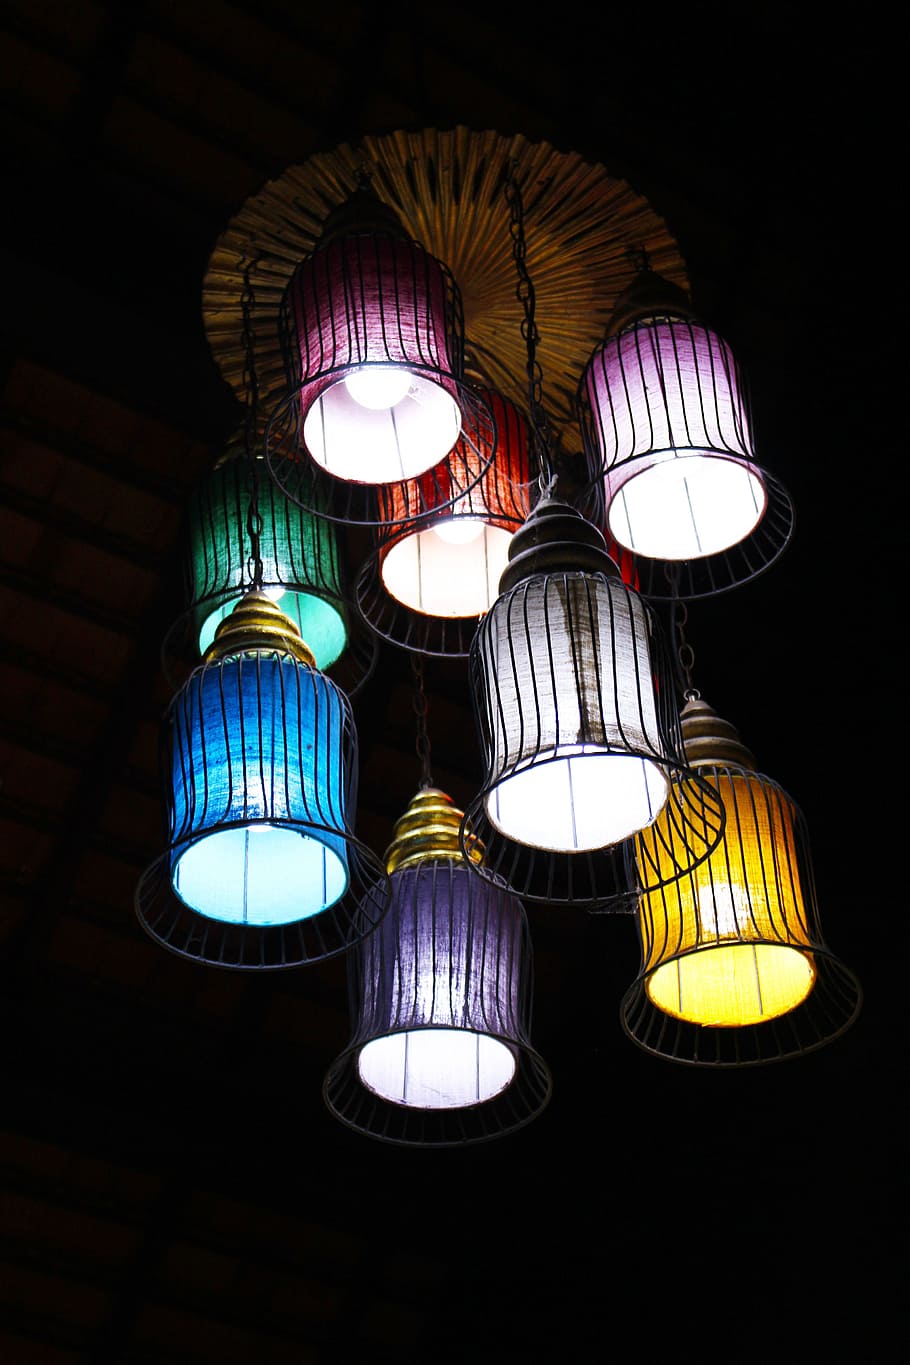 Lights, Ceiling, ceiling lights, interior, design, room, modern, lamp, wall, architecture